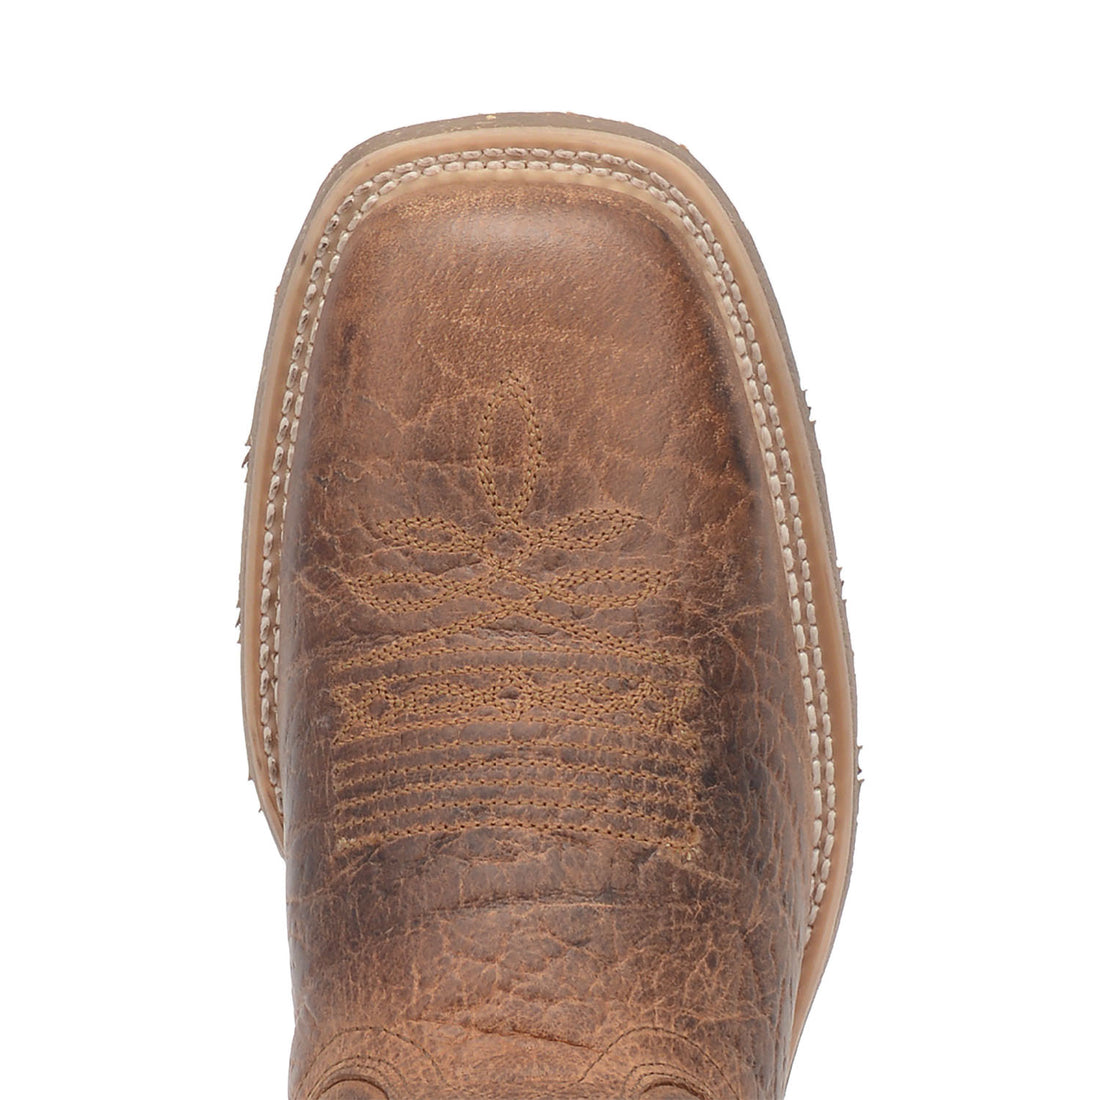 DURANT LEATHER BOOT Preview #6